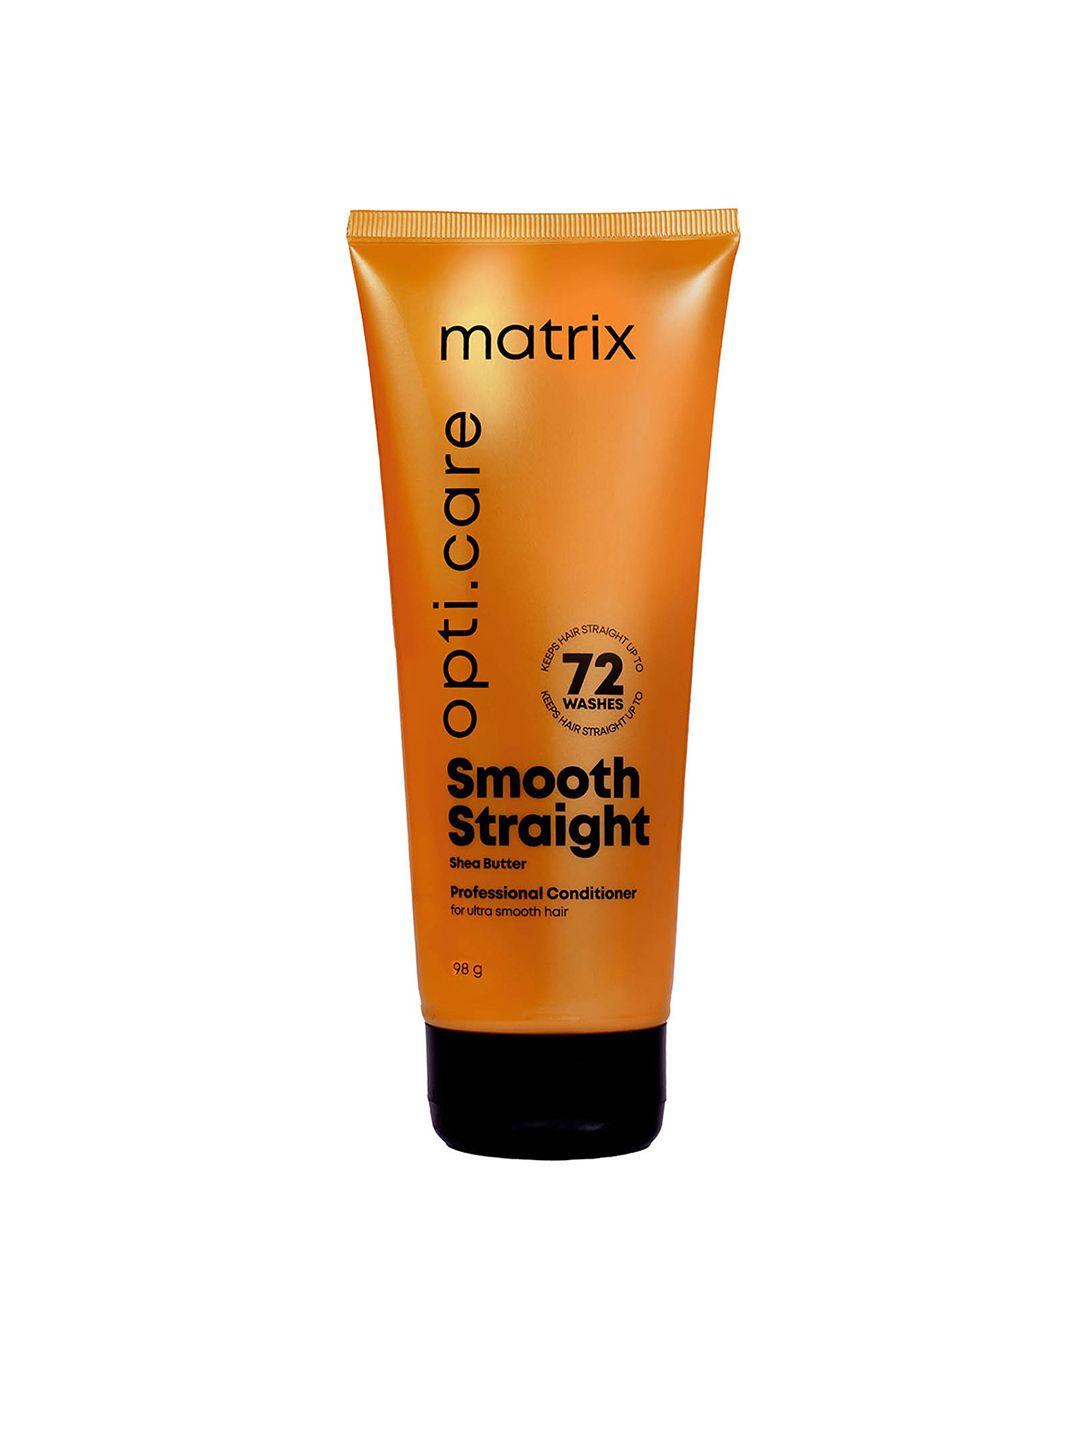 matrix-opti-care-smooth-straight-professional-conditioner-with-shea-butter---98g